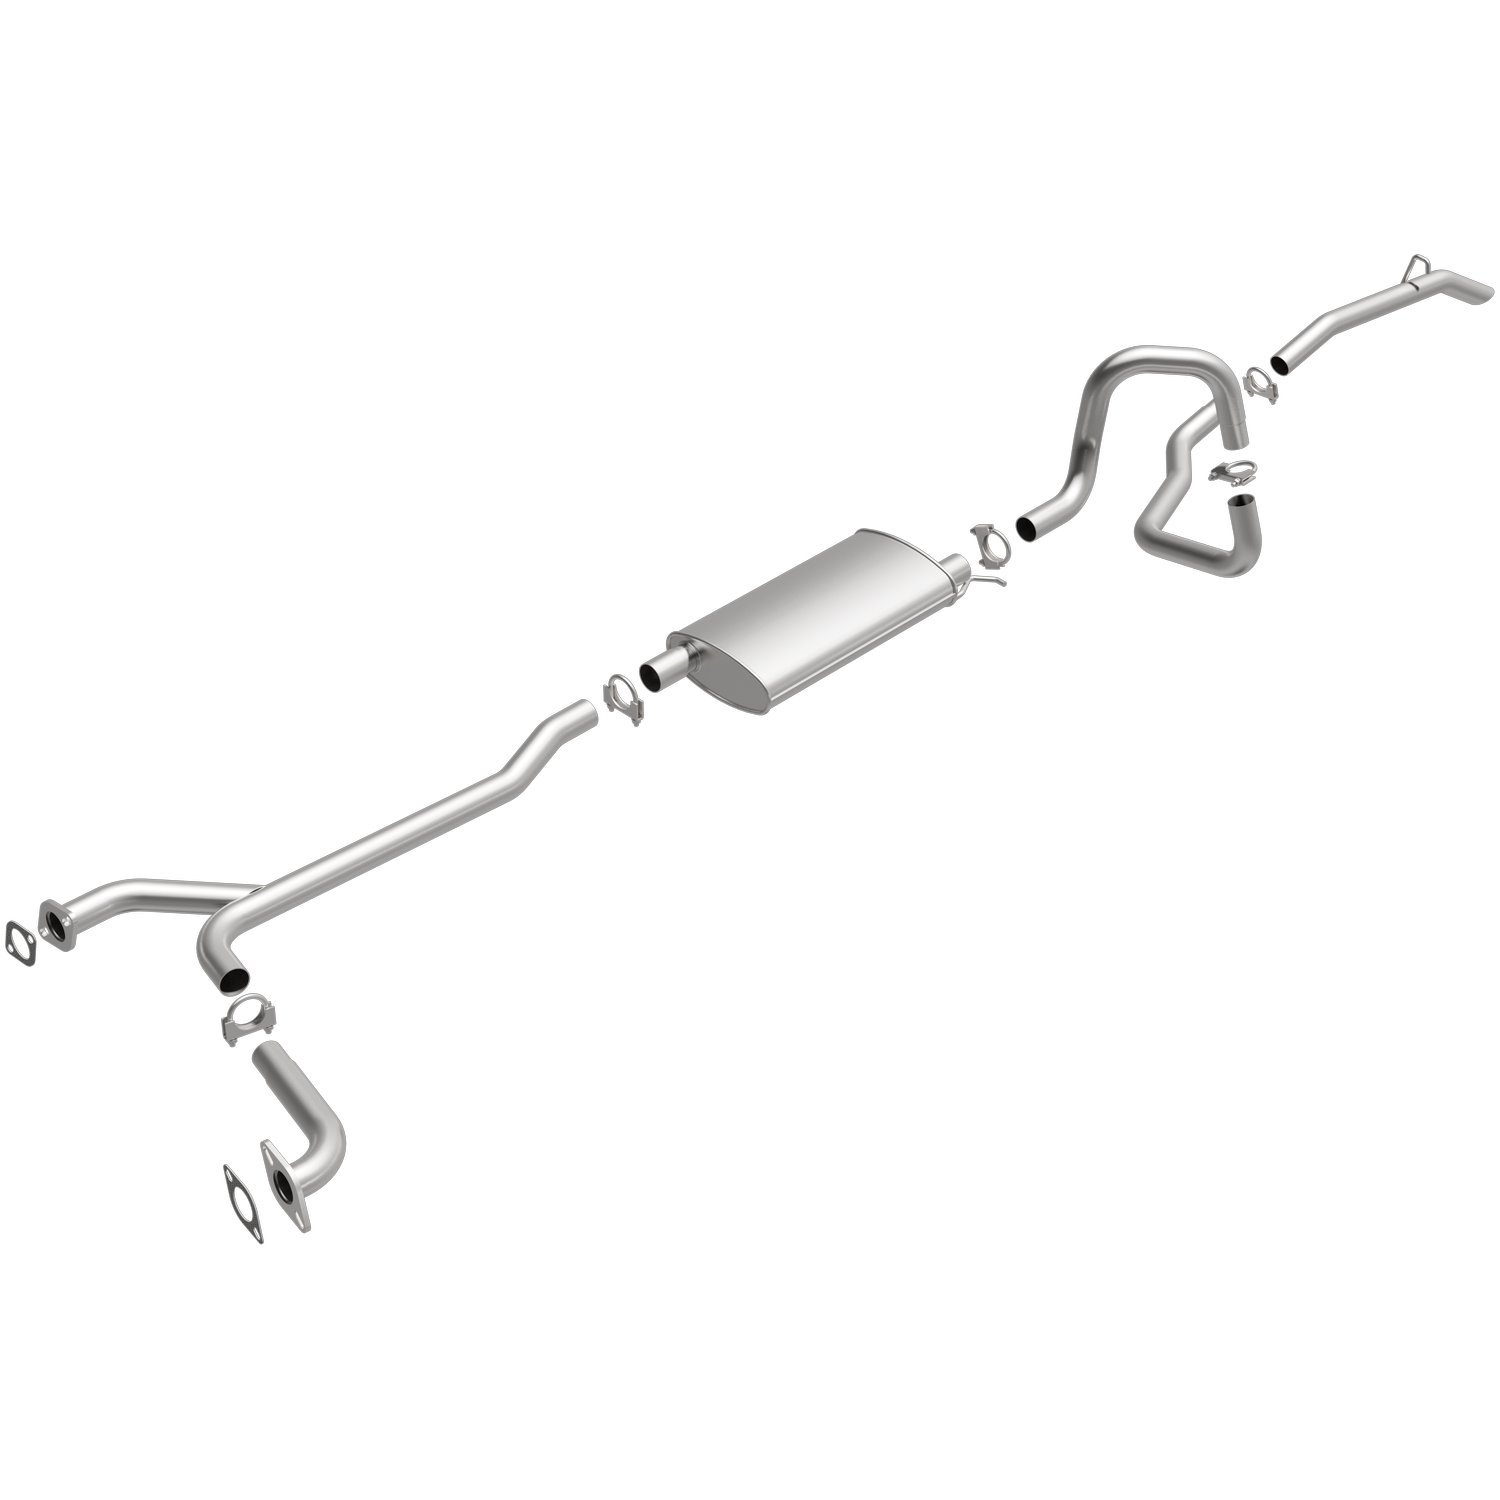 Direct-Fit Exhaust Kit, 1990-1997 Ford Crown Victoria LTD